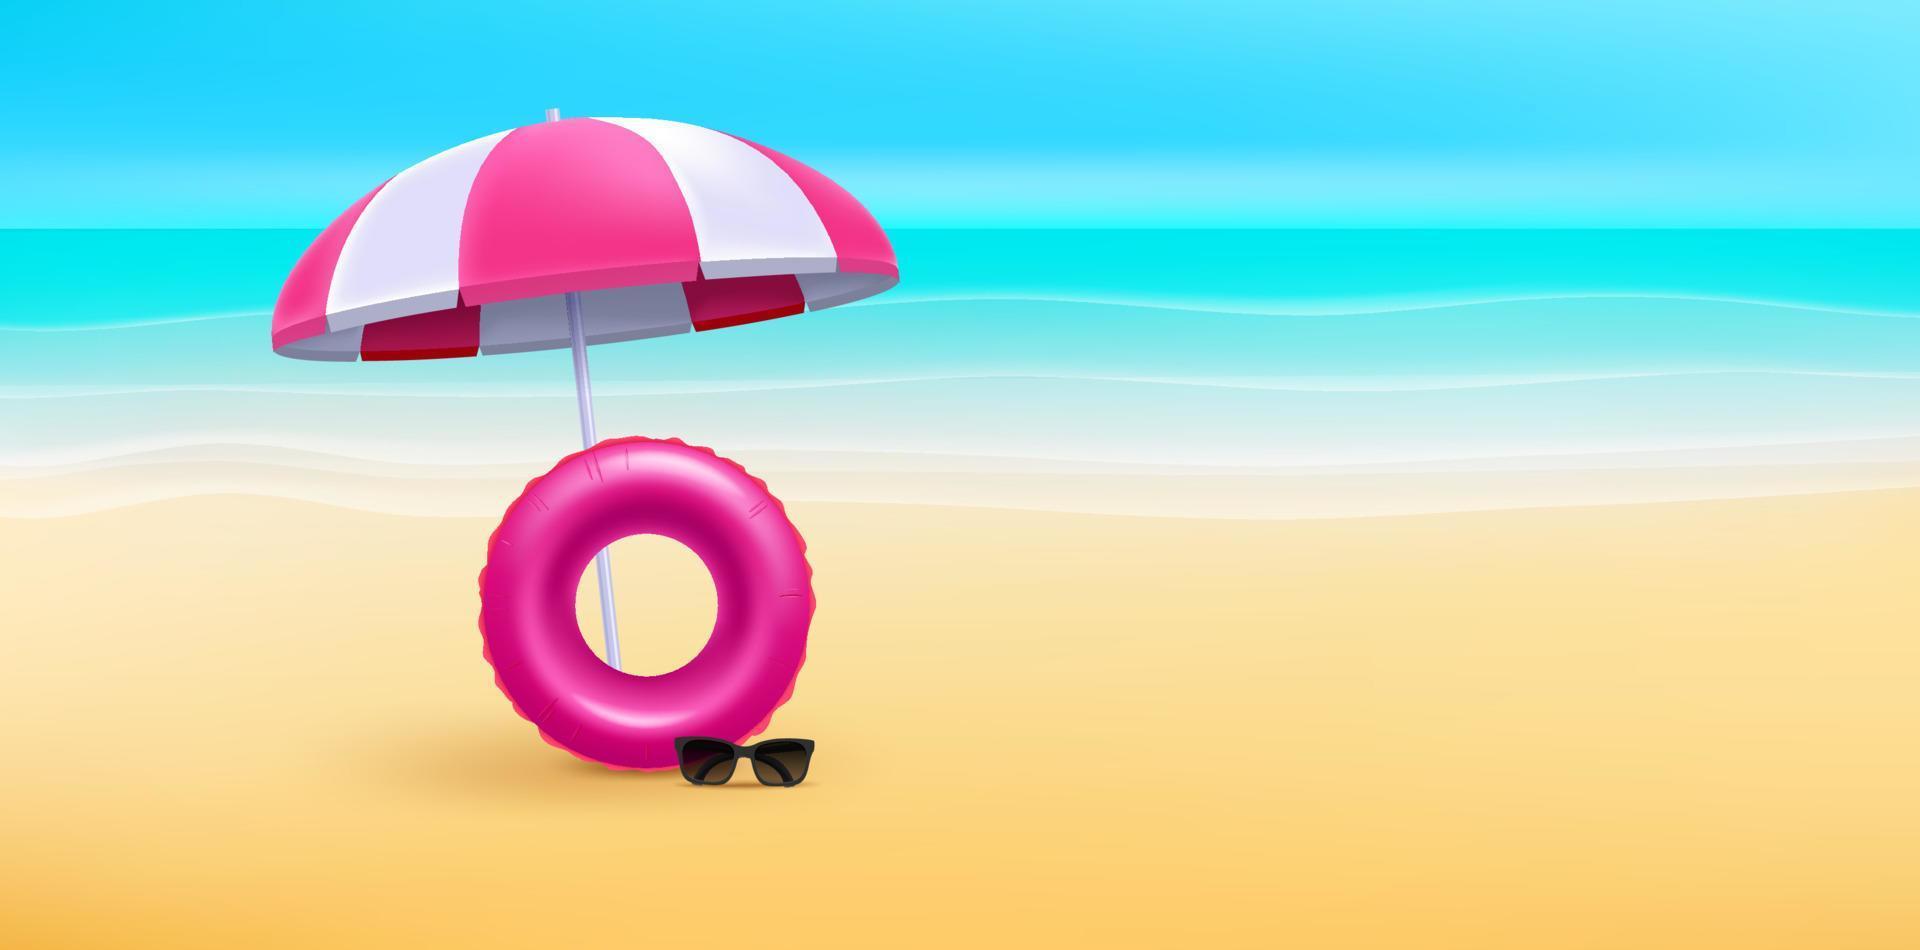 Beach landscape with umbrella and floater vector